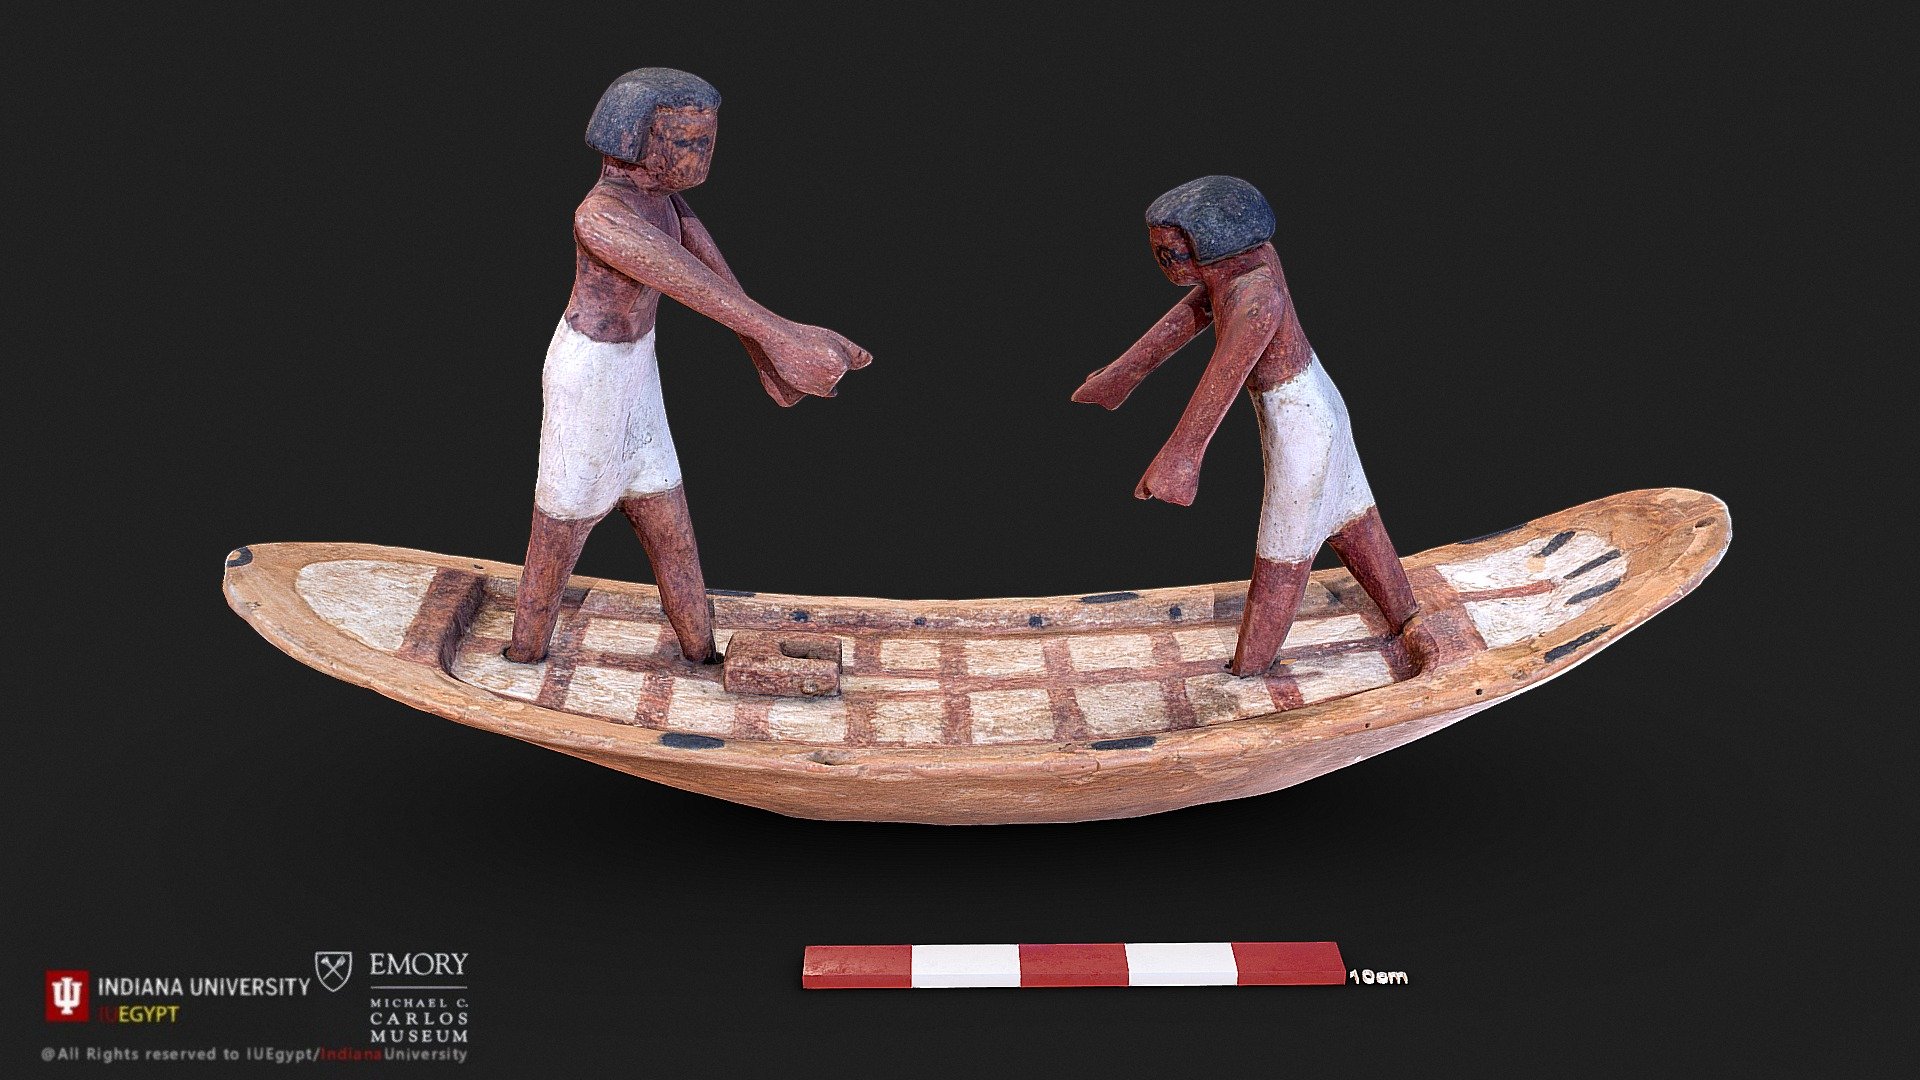 Model Boat
PLACE CREATED  Egypt, Africa
CULTURE Egyptian
PERIOD Middle Kingdom, Dynasty 11
DATE 2080-1940 BCE
MEDIUM Wood, pigment
CREDIT LINE Gift of the Georges Ricard Foundation
DIMENSIONS 5 7/8 x 12 13/16 x 3 5/16 in., 190 g (15 x 32.5 x 8.4 cm, 6 11/16 oz.)
OBJECT NUMBER 2018.010.126
PROVENANCE Purchased by Georges Ricard (1921-2012) from Jean-François Mignon, Aix-en Provence, France, February 24, 1974. Ex coll. Musée de l'Égypte et le Monde Antique, Collection Sanousrit, Monaco, 1975-1982. Ex coll. Georges Ricard Foundation, Santa Barbara, California.
STATUS Not on view
COLLECTIONS  Ancient Egyptian, Nubian, and Near Eastern Art
CAMERA Nikon D850
LENS Nikkor 35mm
PHOTOGRAMMETRY: Steve Vinson (TL), Leila Hyde, Belle Johnson, Amalee Bowen
IMAGE PROCESSOR: Amalee Bowen
Image processor supervisor: Mohamed Abdelaziz
https://collections.carlos.emory.edu/objects/38307/model-boat
 - Model Boat - 3D model by iuegypt 3d model